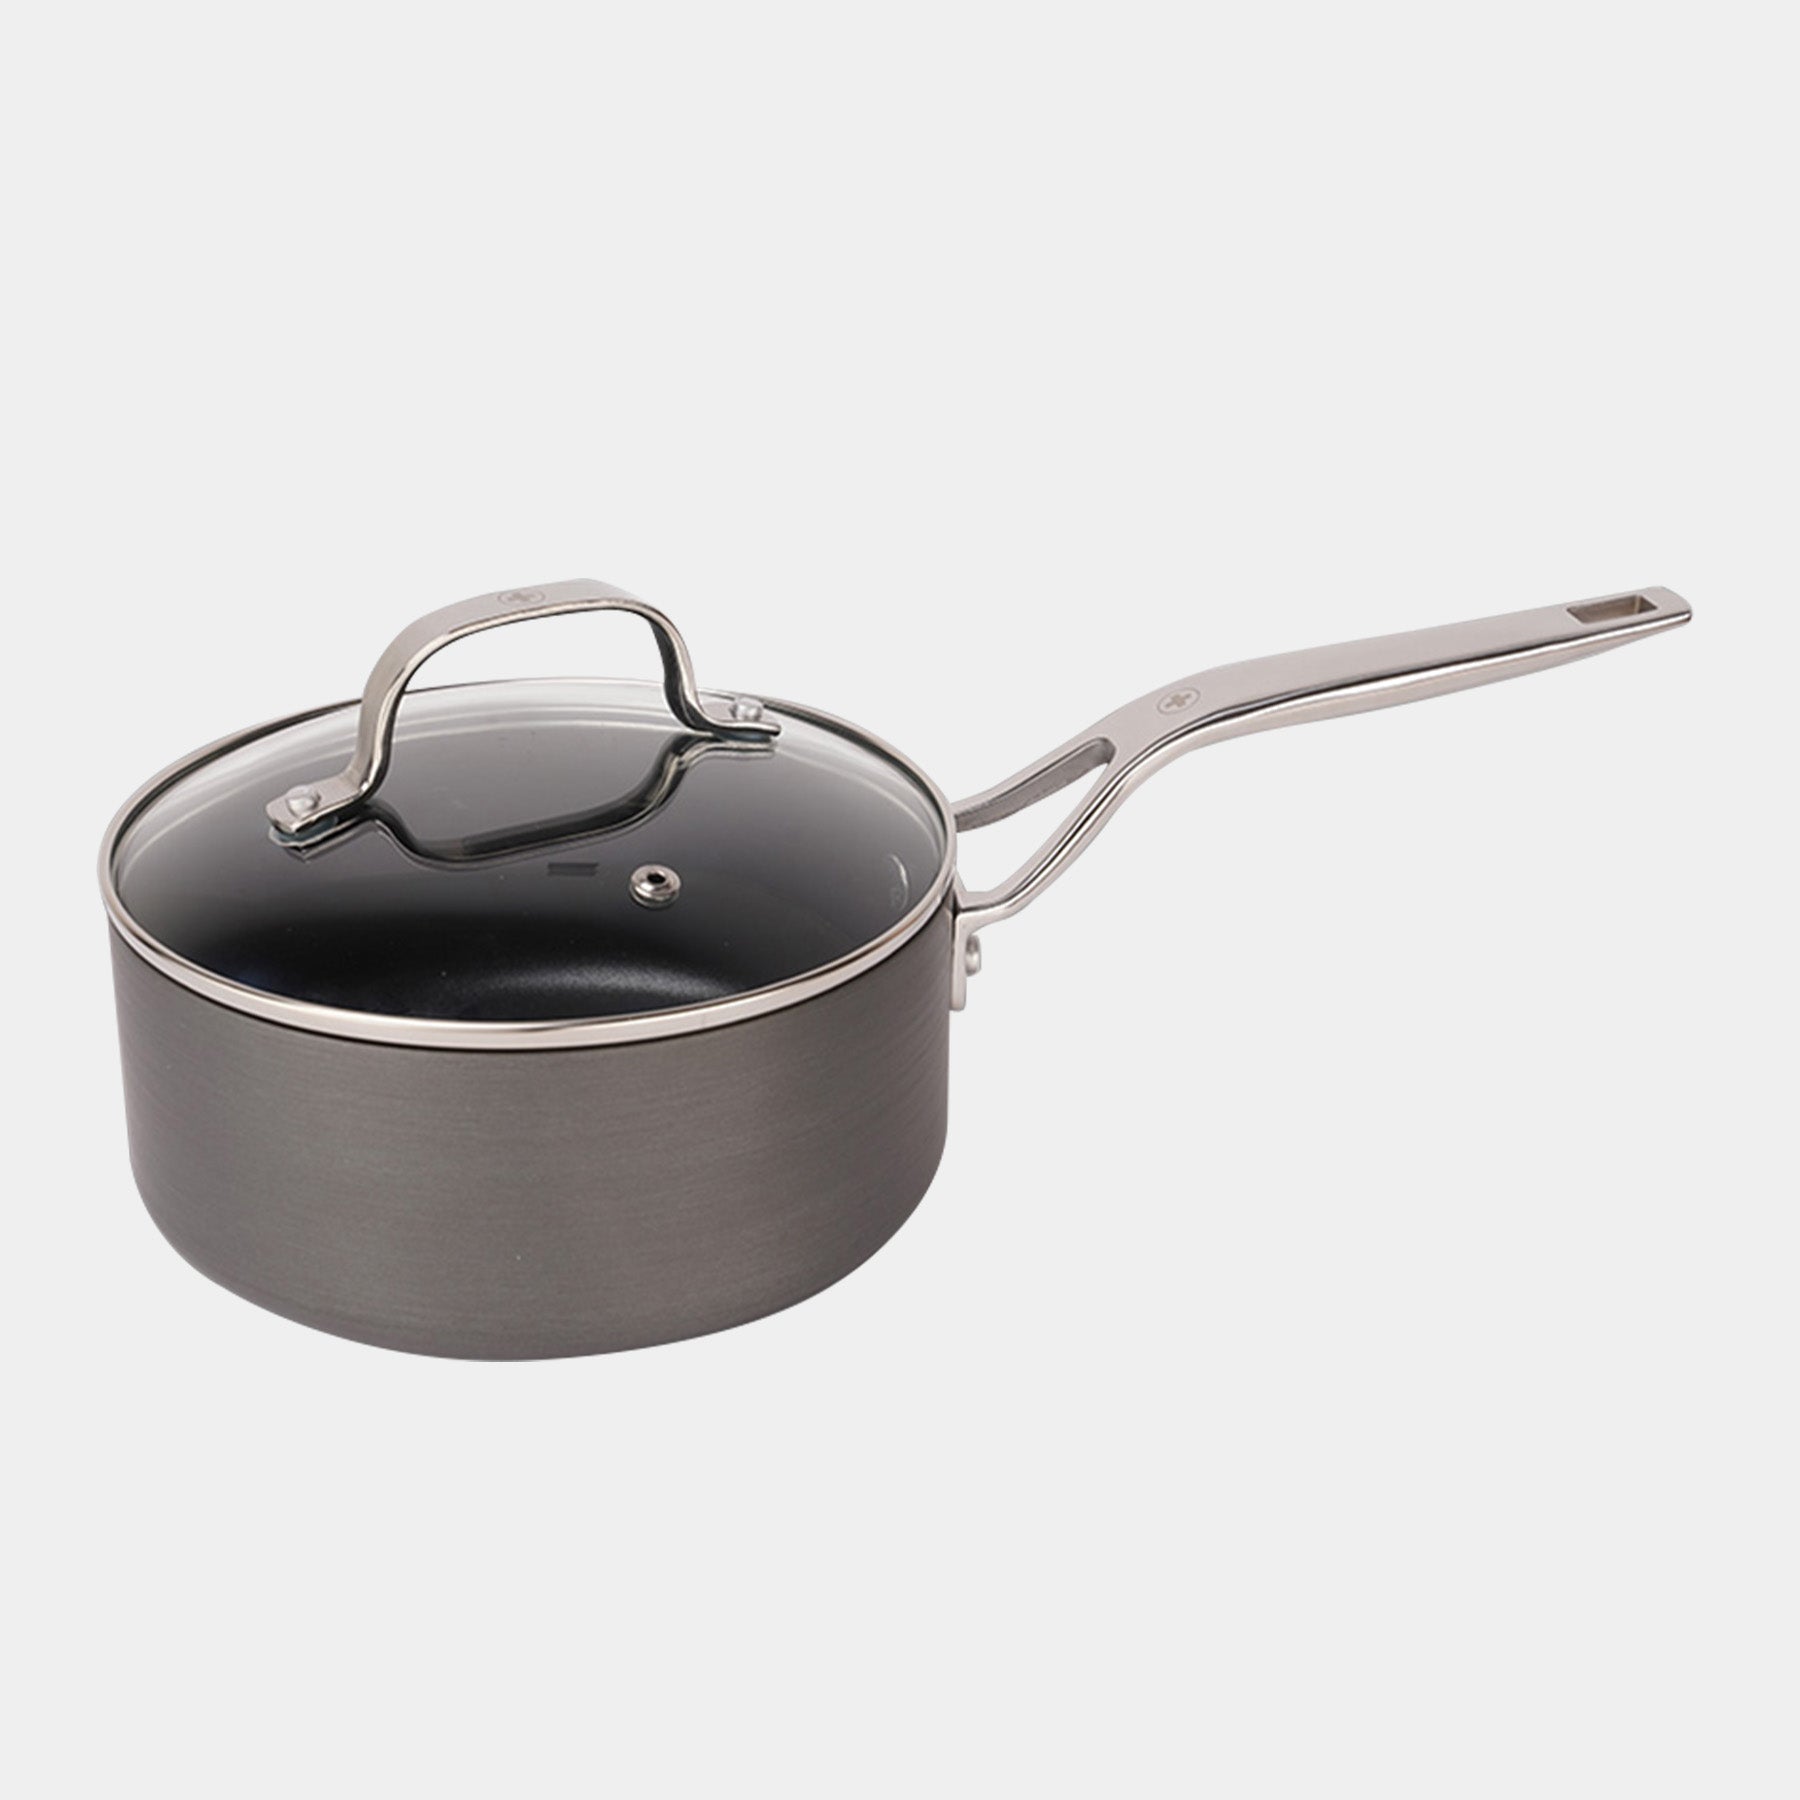 Hard Anodised 1.5 qt Saucepan with Glass Lid - Induction